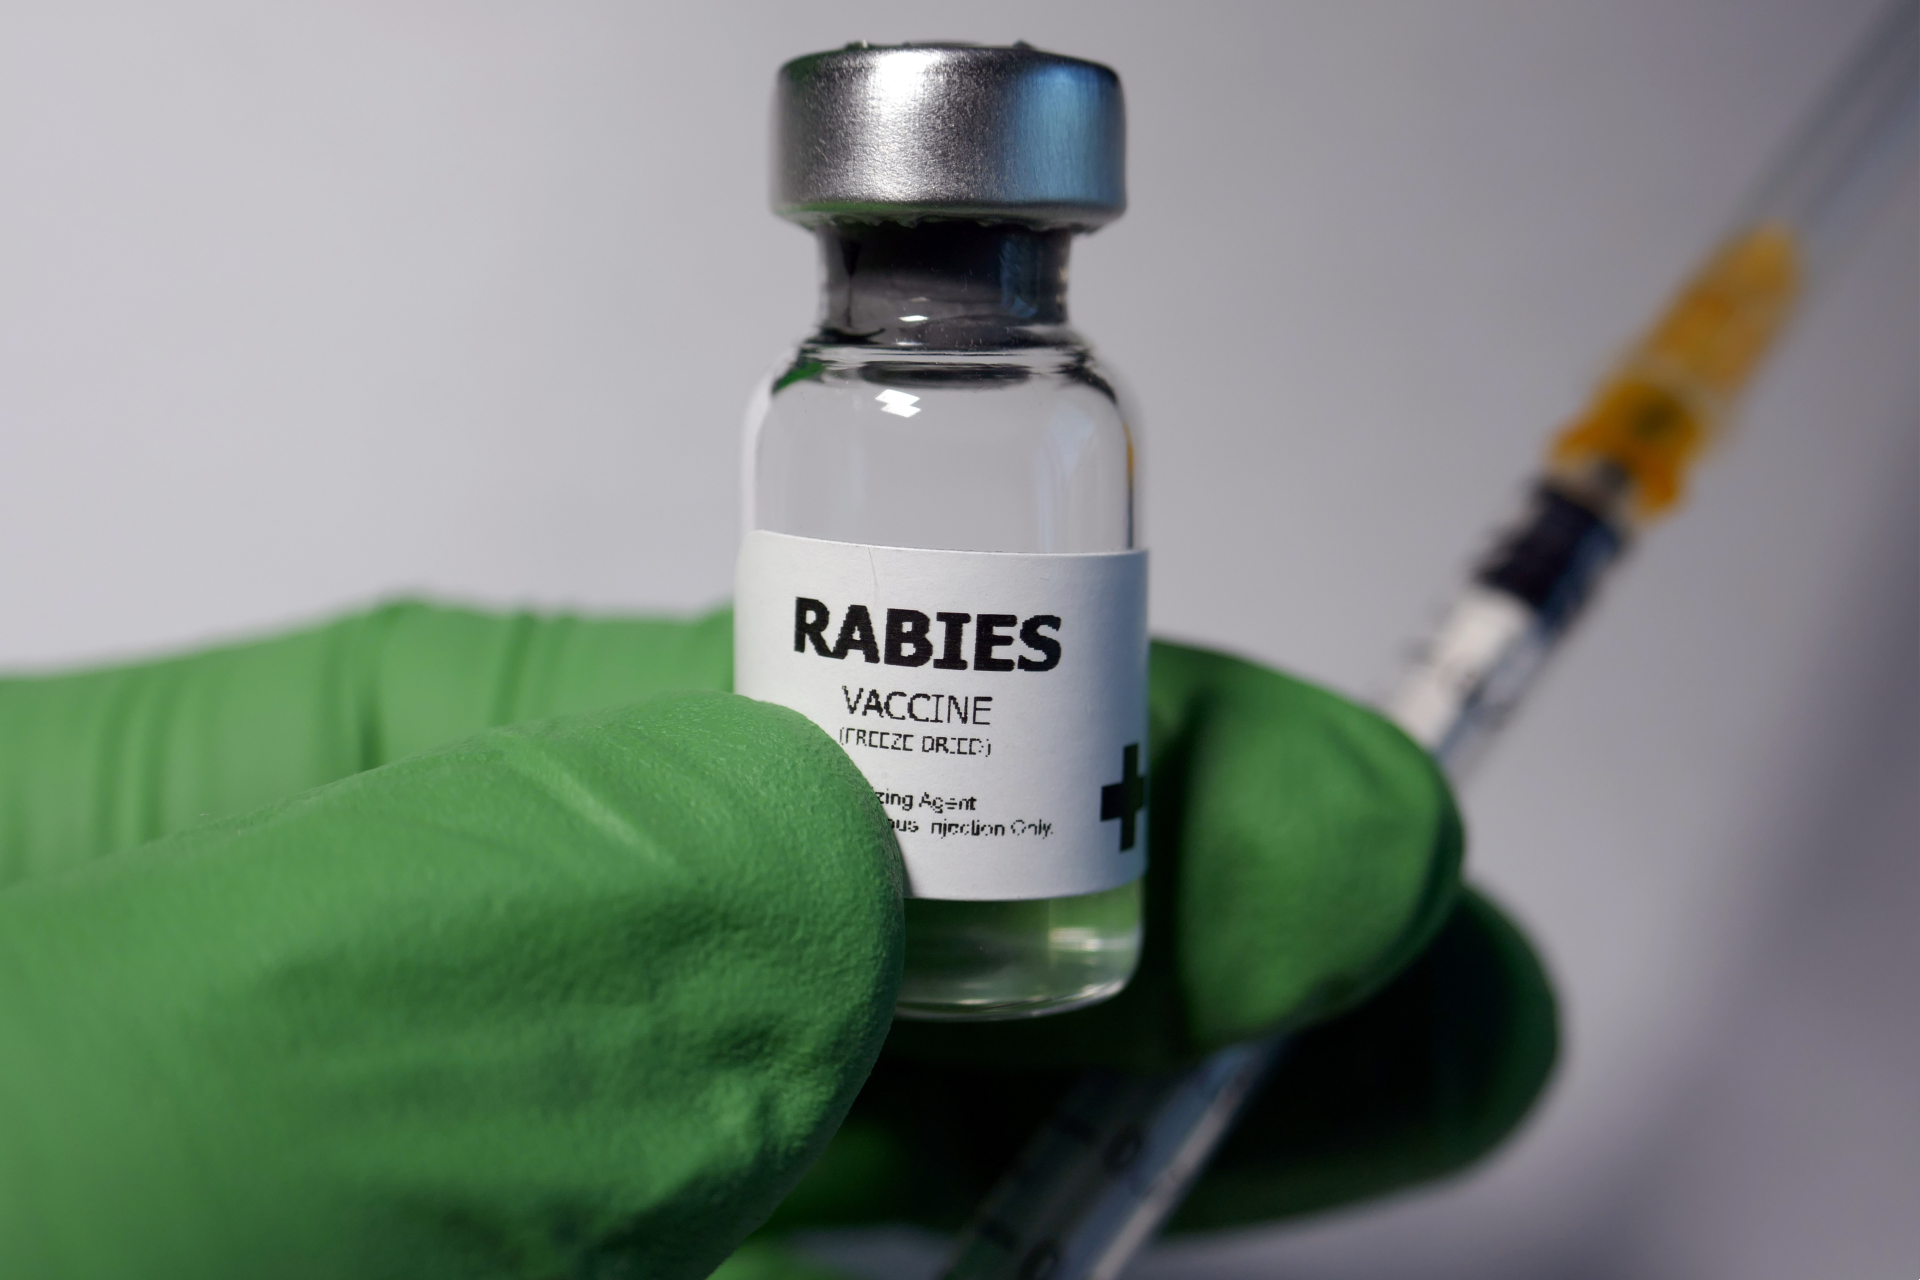 Supreme Court  issues notice to Centre on study over efficacy of current rabies vaccines in India